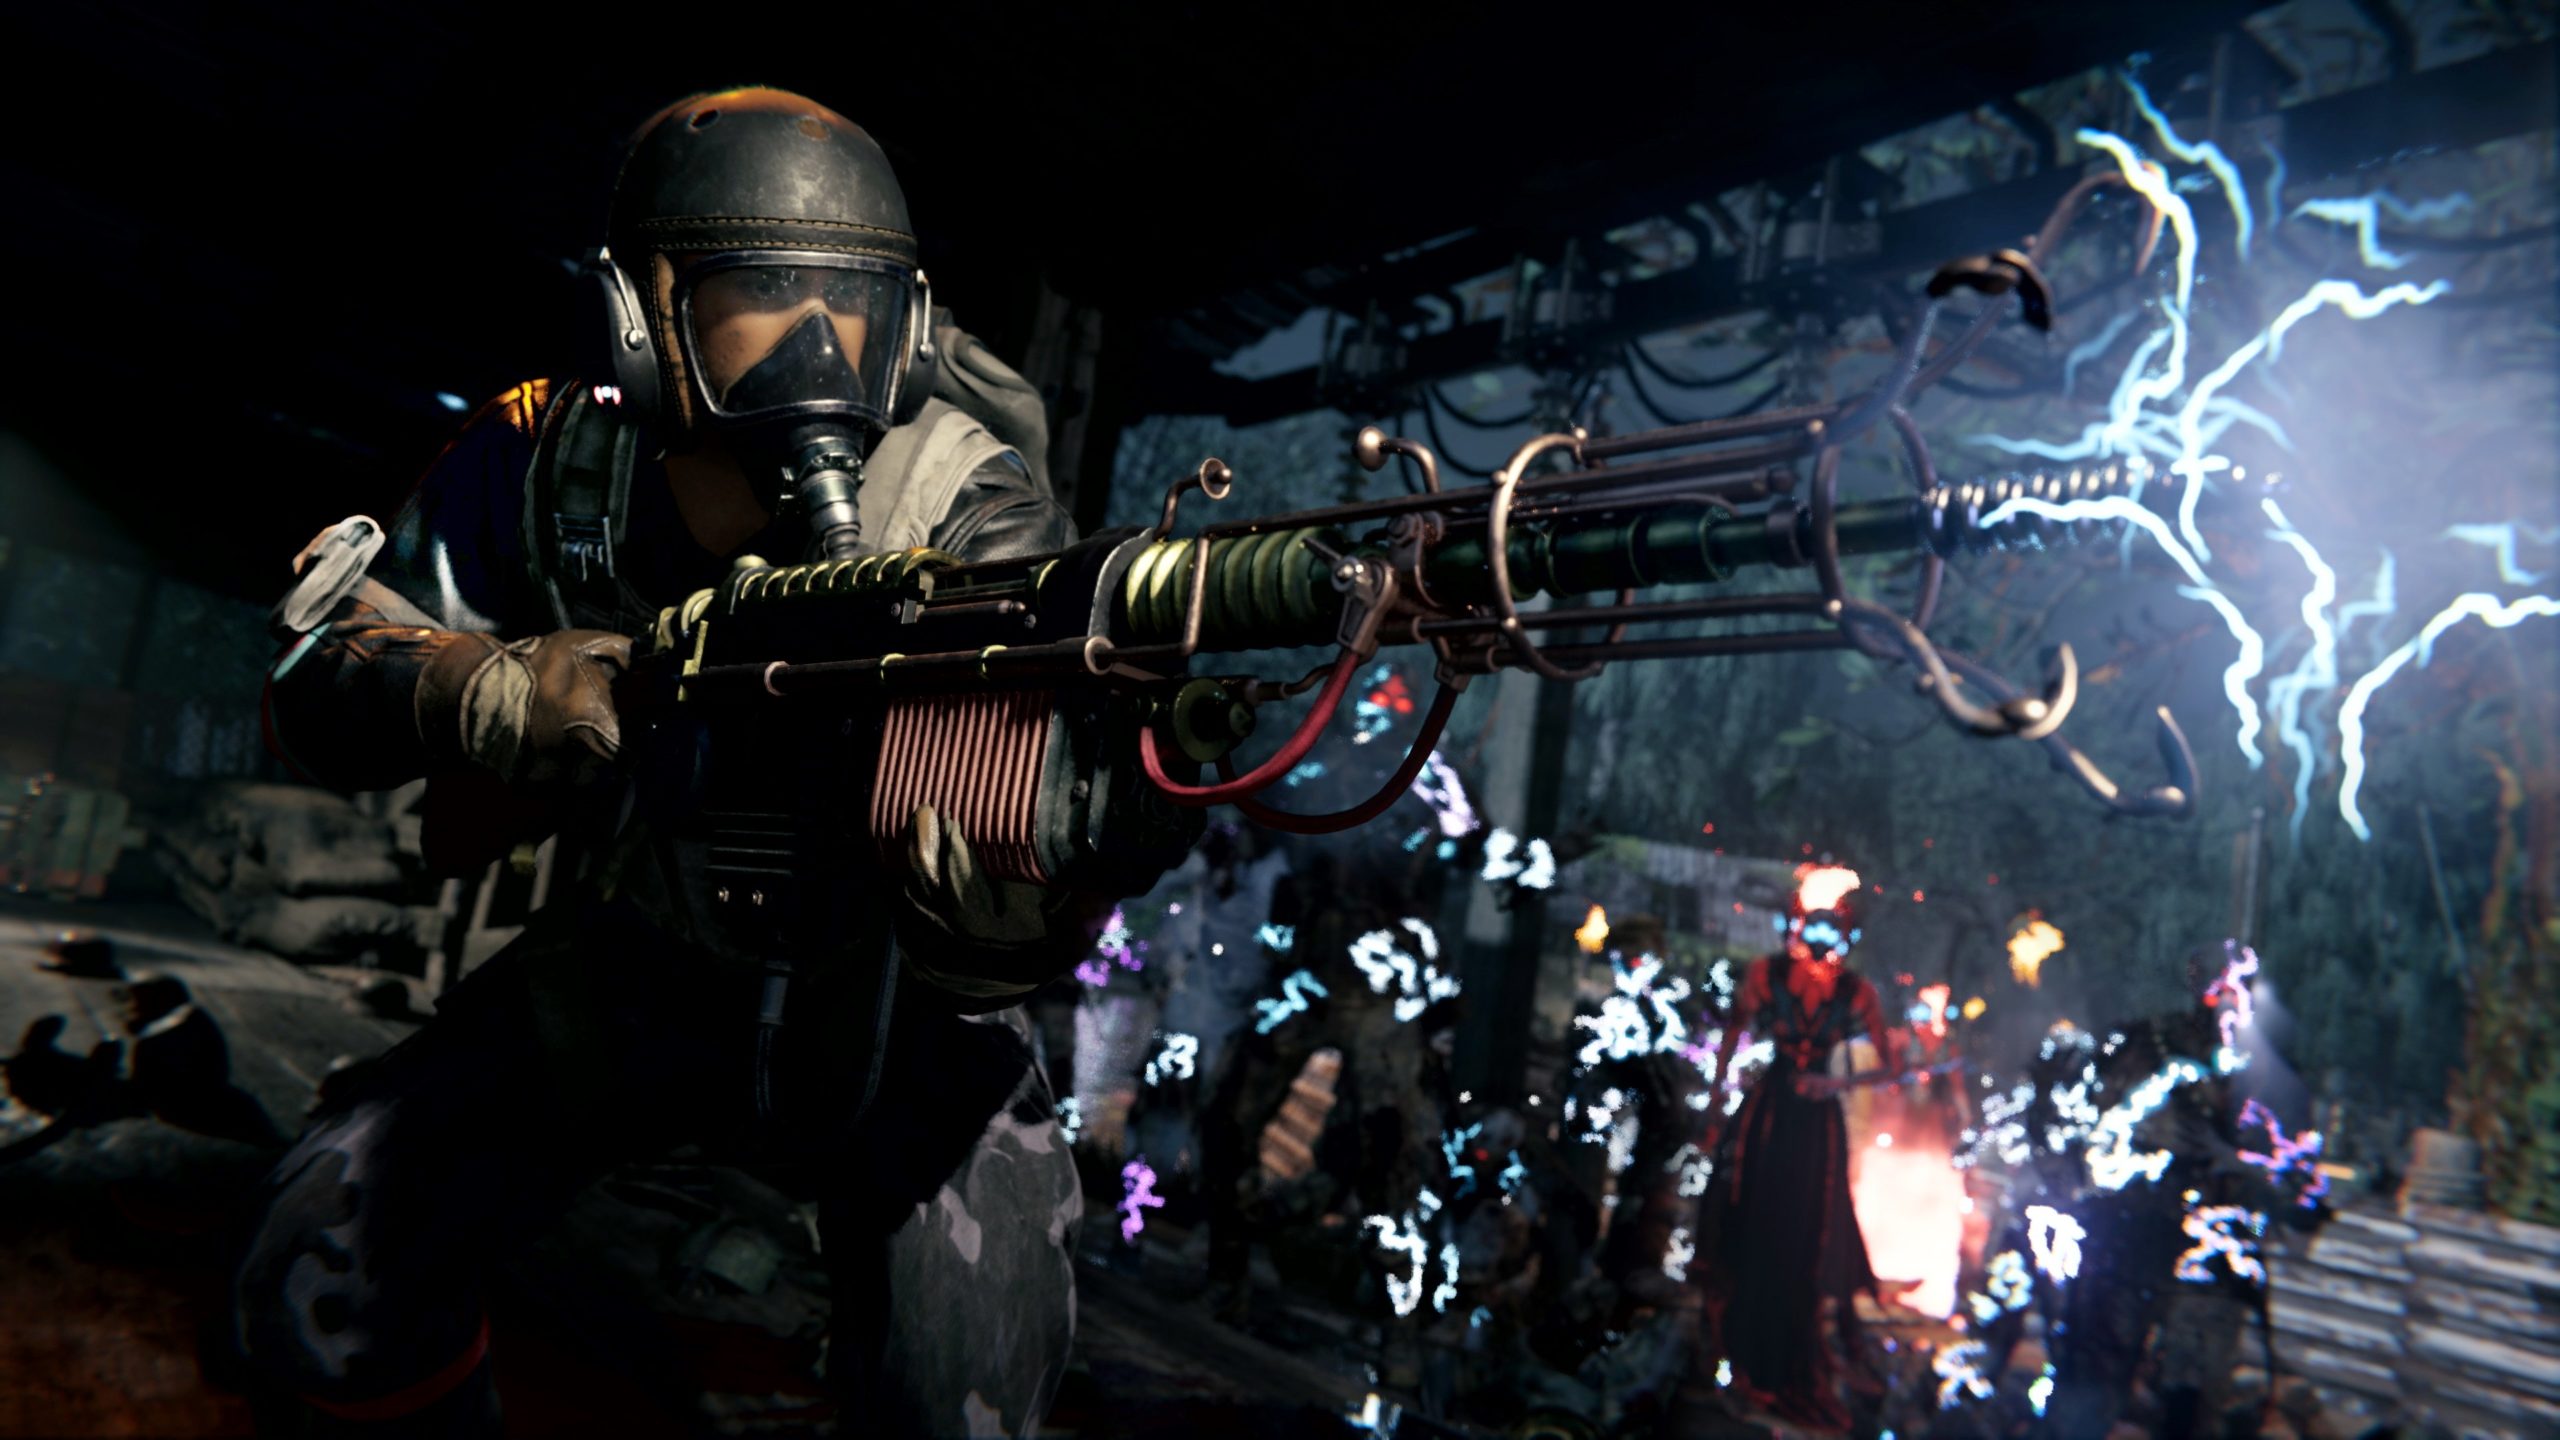 wunderwaffe-dg-2-appears-set-to-return-to-call-of-duty-zombies-in-vanguard-s-shi-no-numa-remake